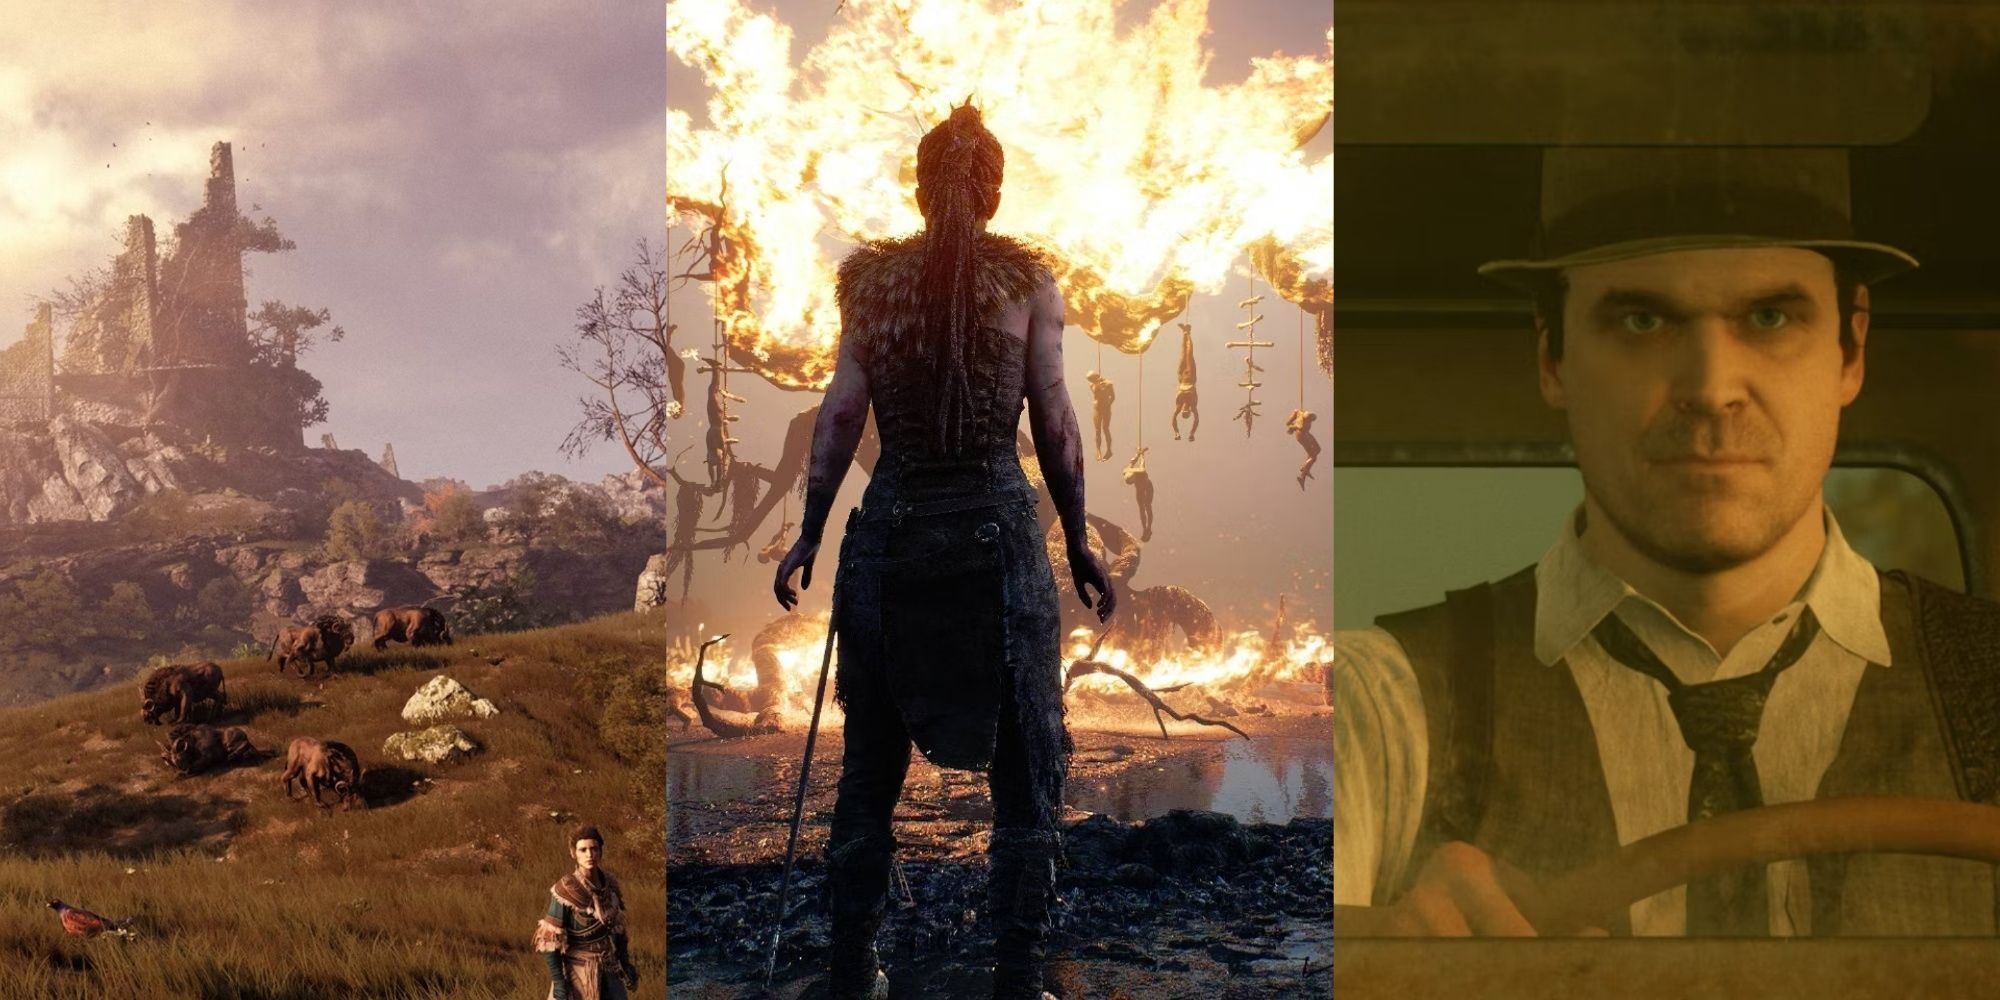 Three-image collage of the fantasy landscape in GreedFall, Hellblade: Senua's Sacrifice, and a close-up of David Harbour's Edward Carnbu driving in the opening of Alone in the Dark.